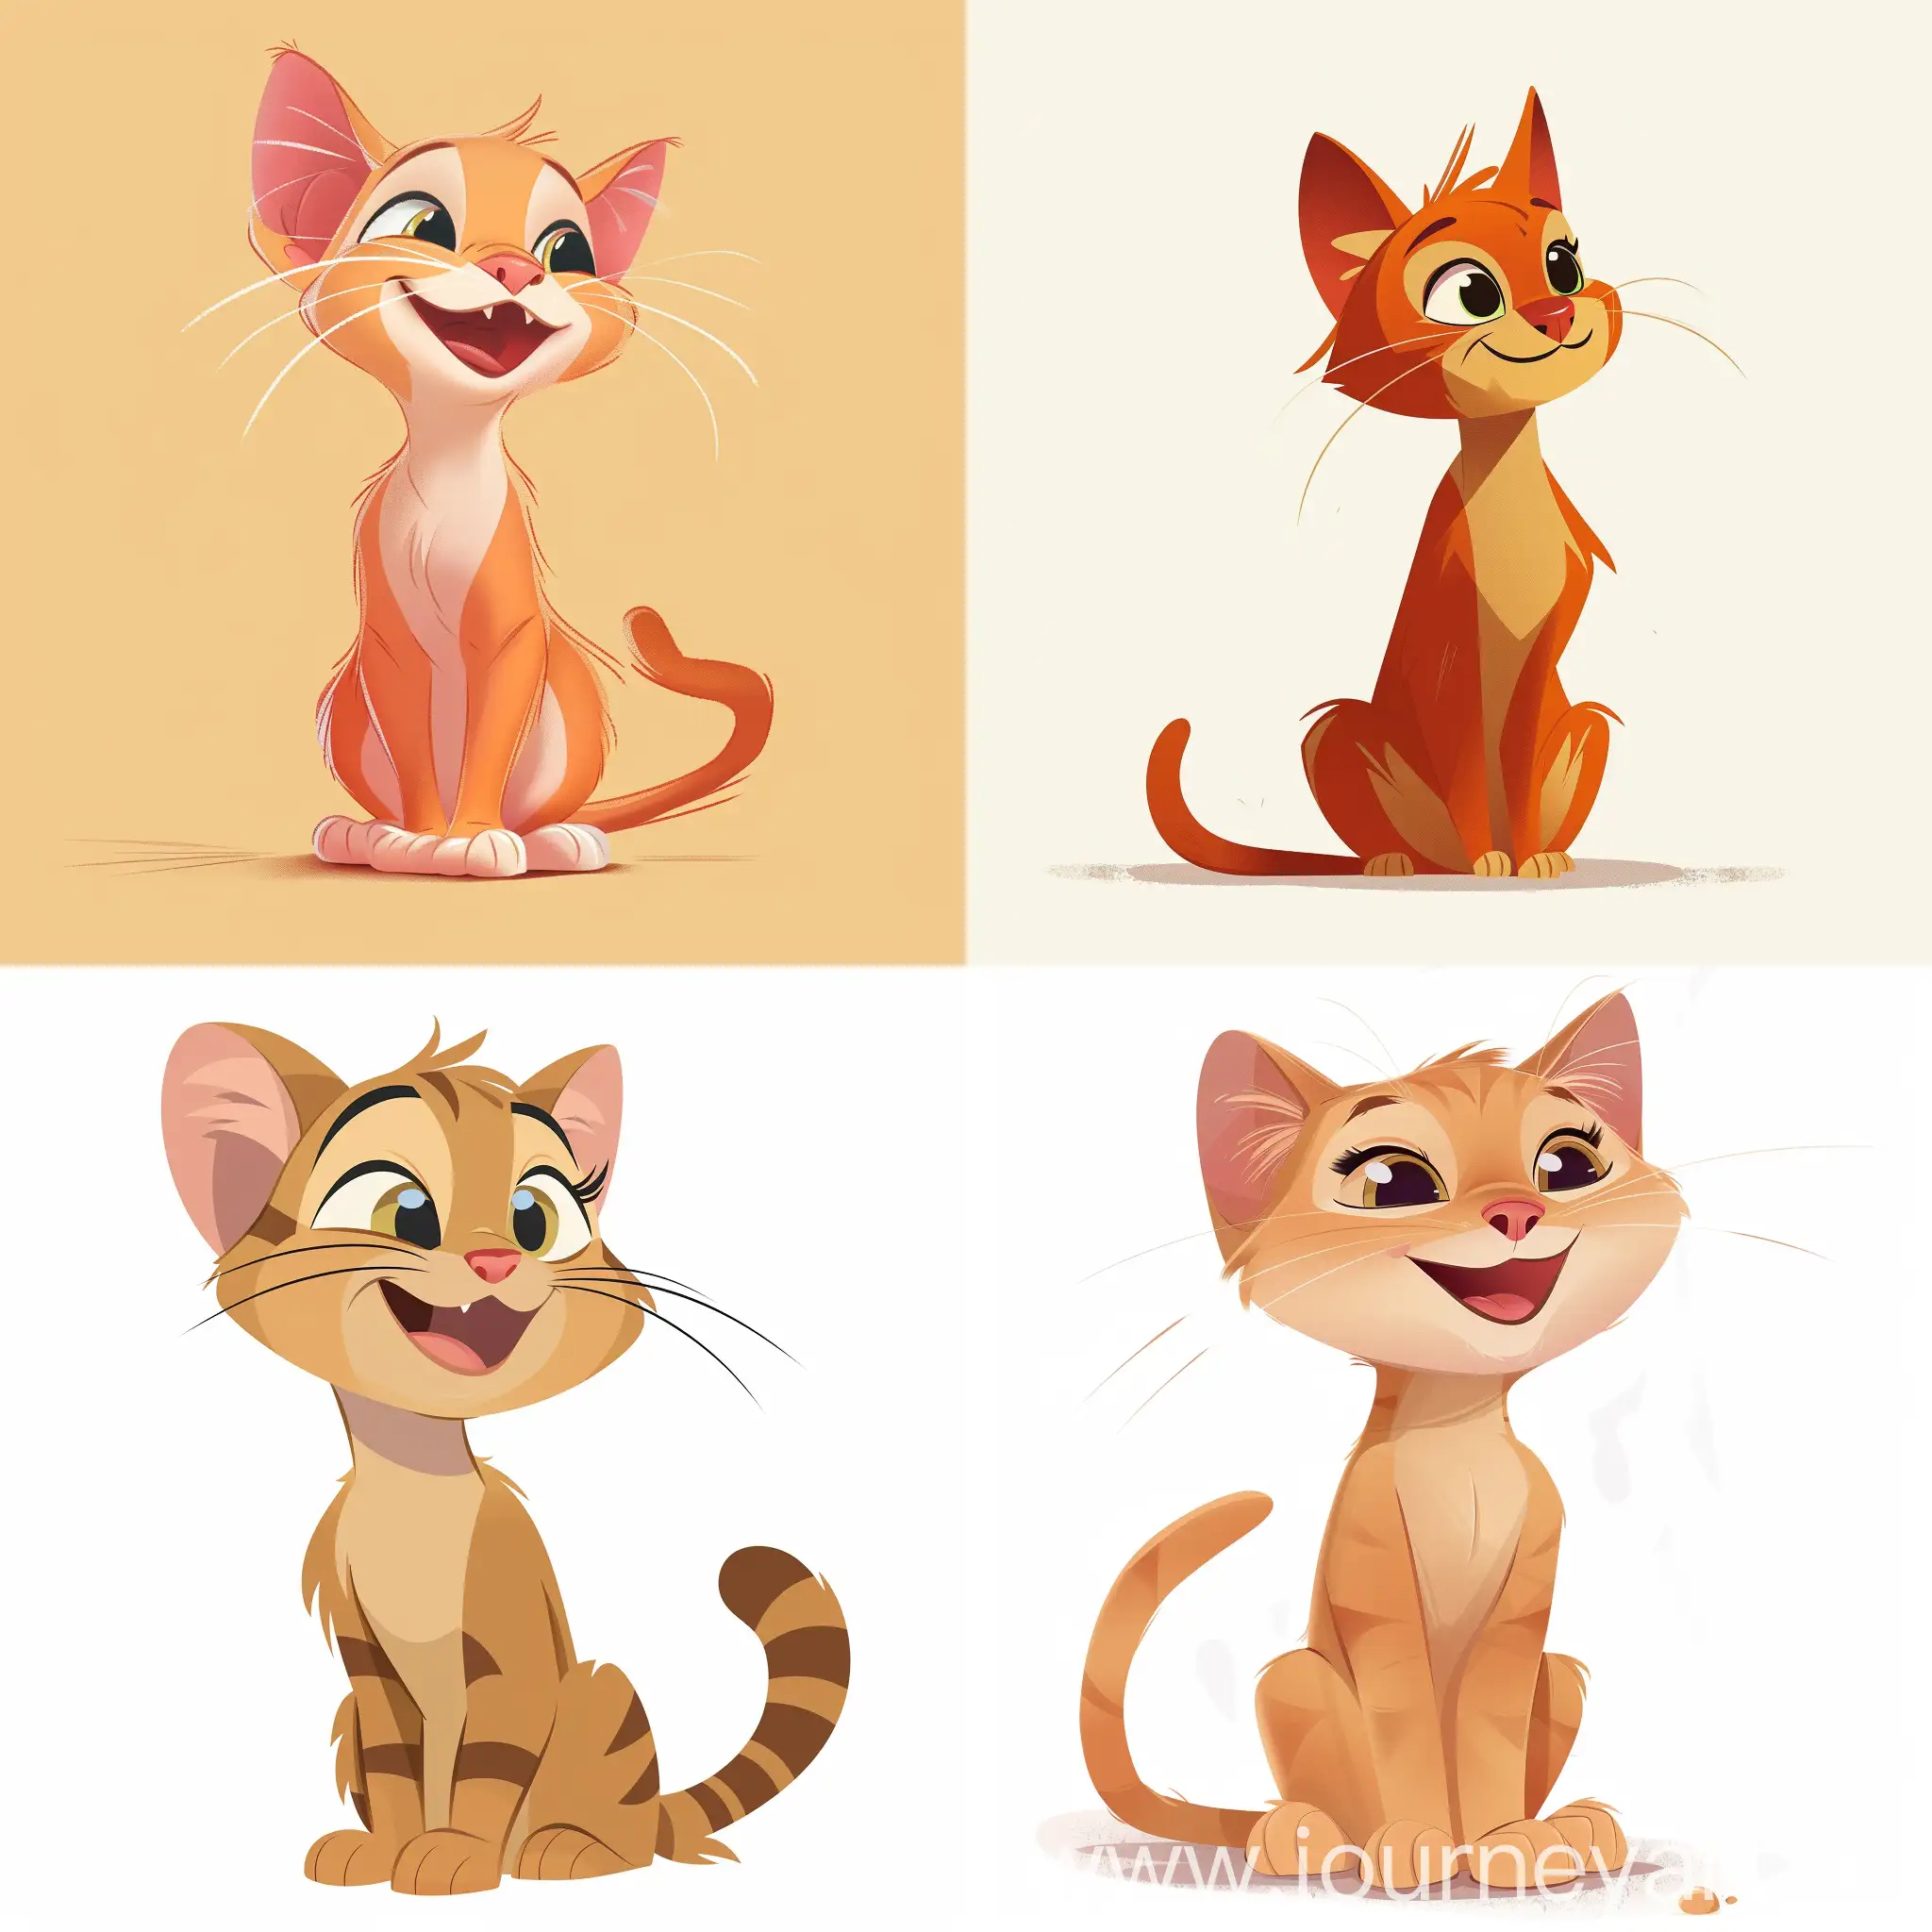 a happy disney young cat, in flat style